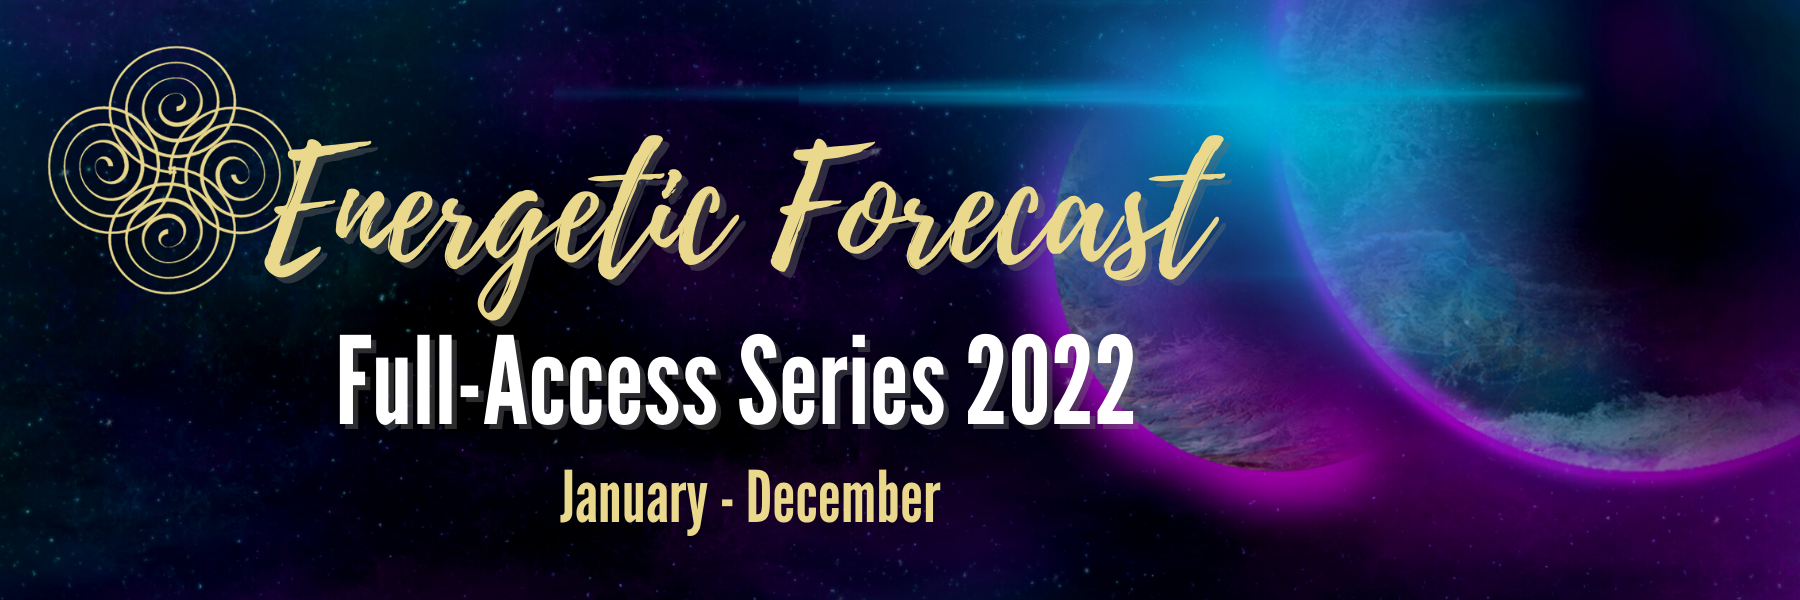 Energetic Forecast Full-Access Series 2022